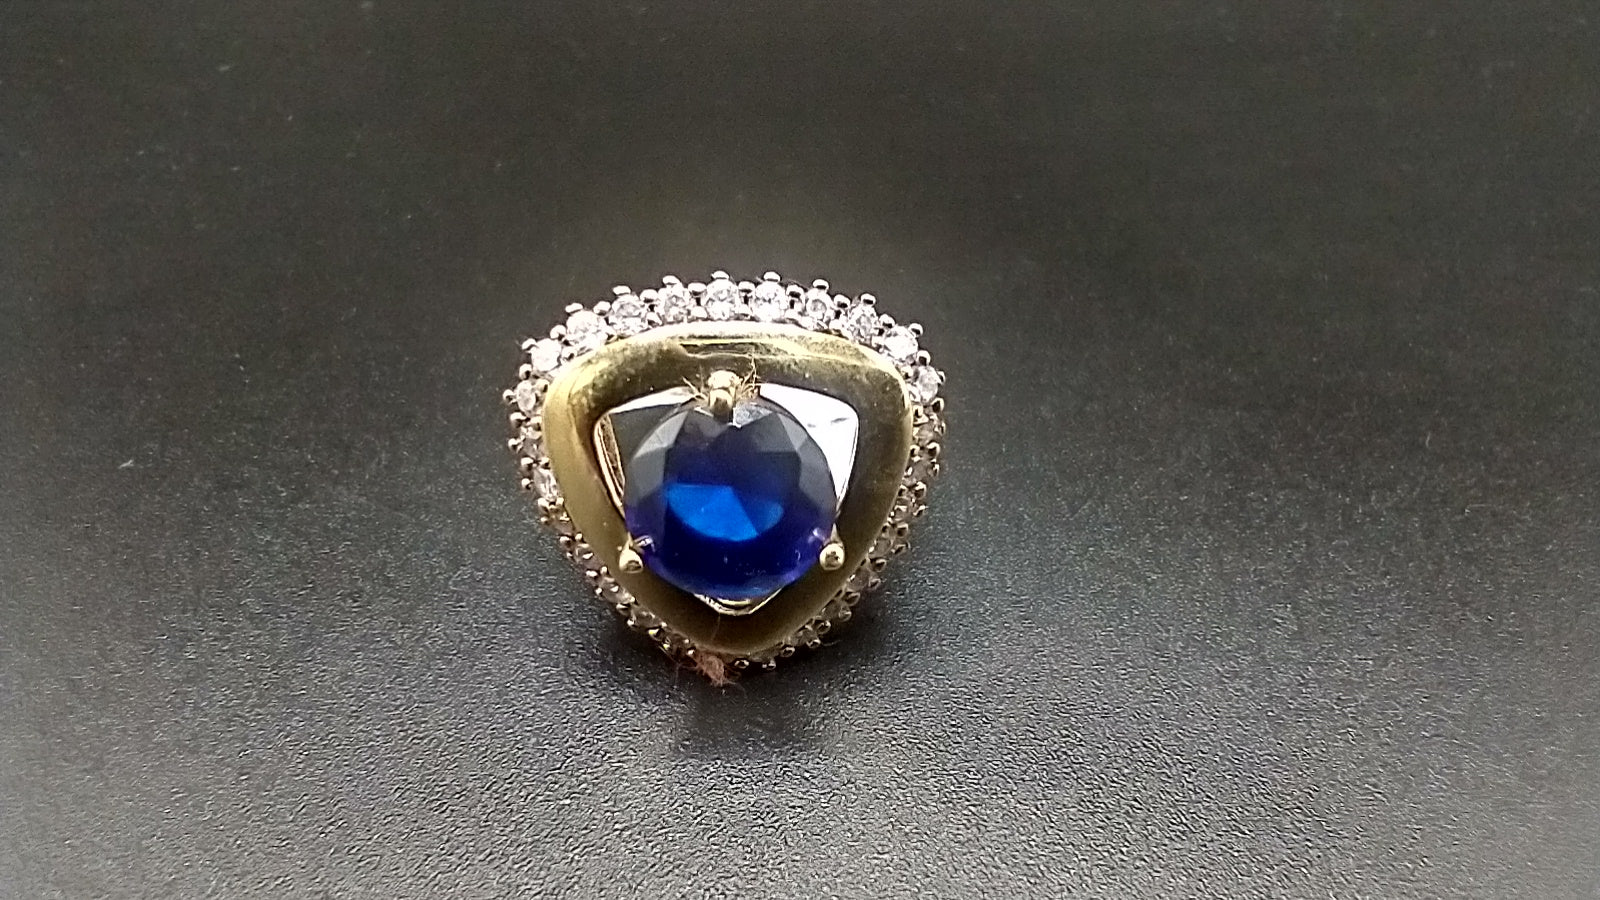 "NO COMPROMISE" Topaz 925 sterling silver and bronze ring size 8.........$70.00